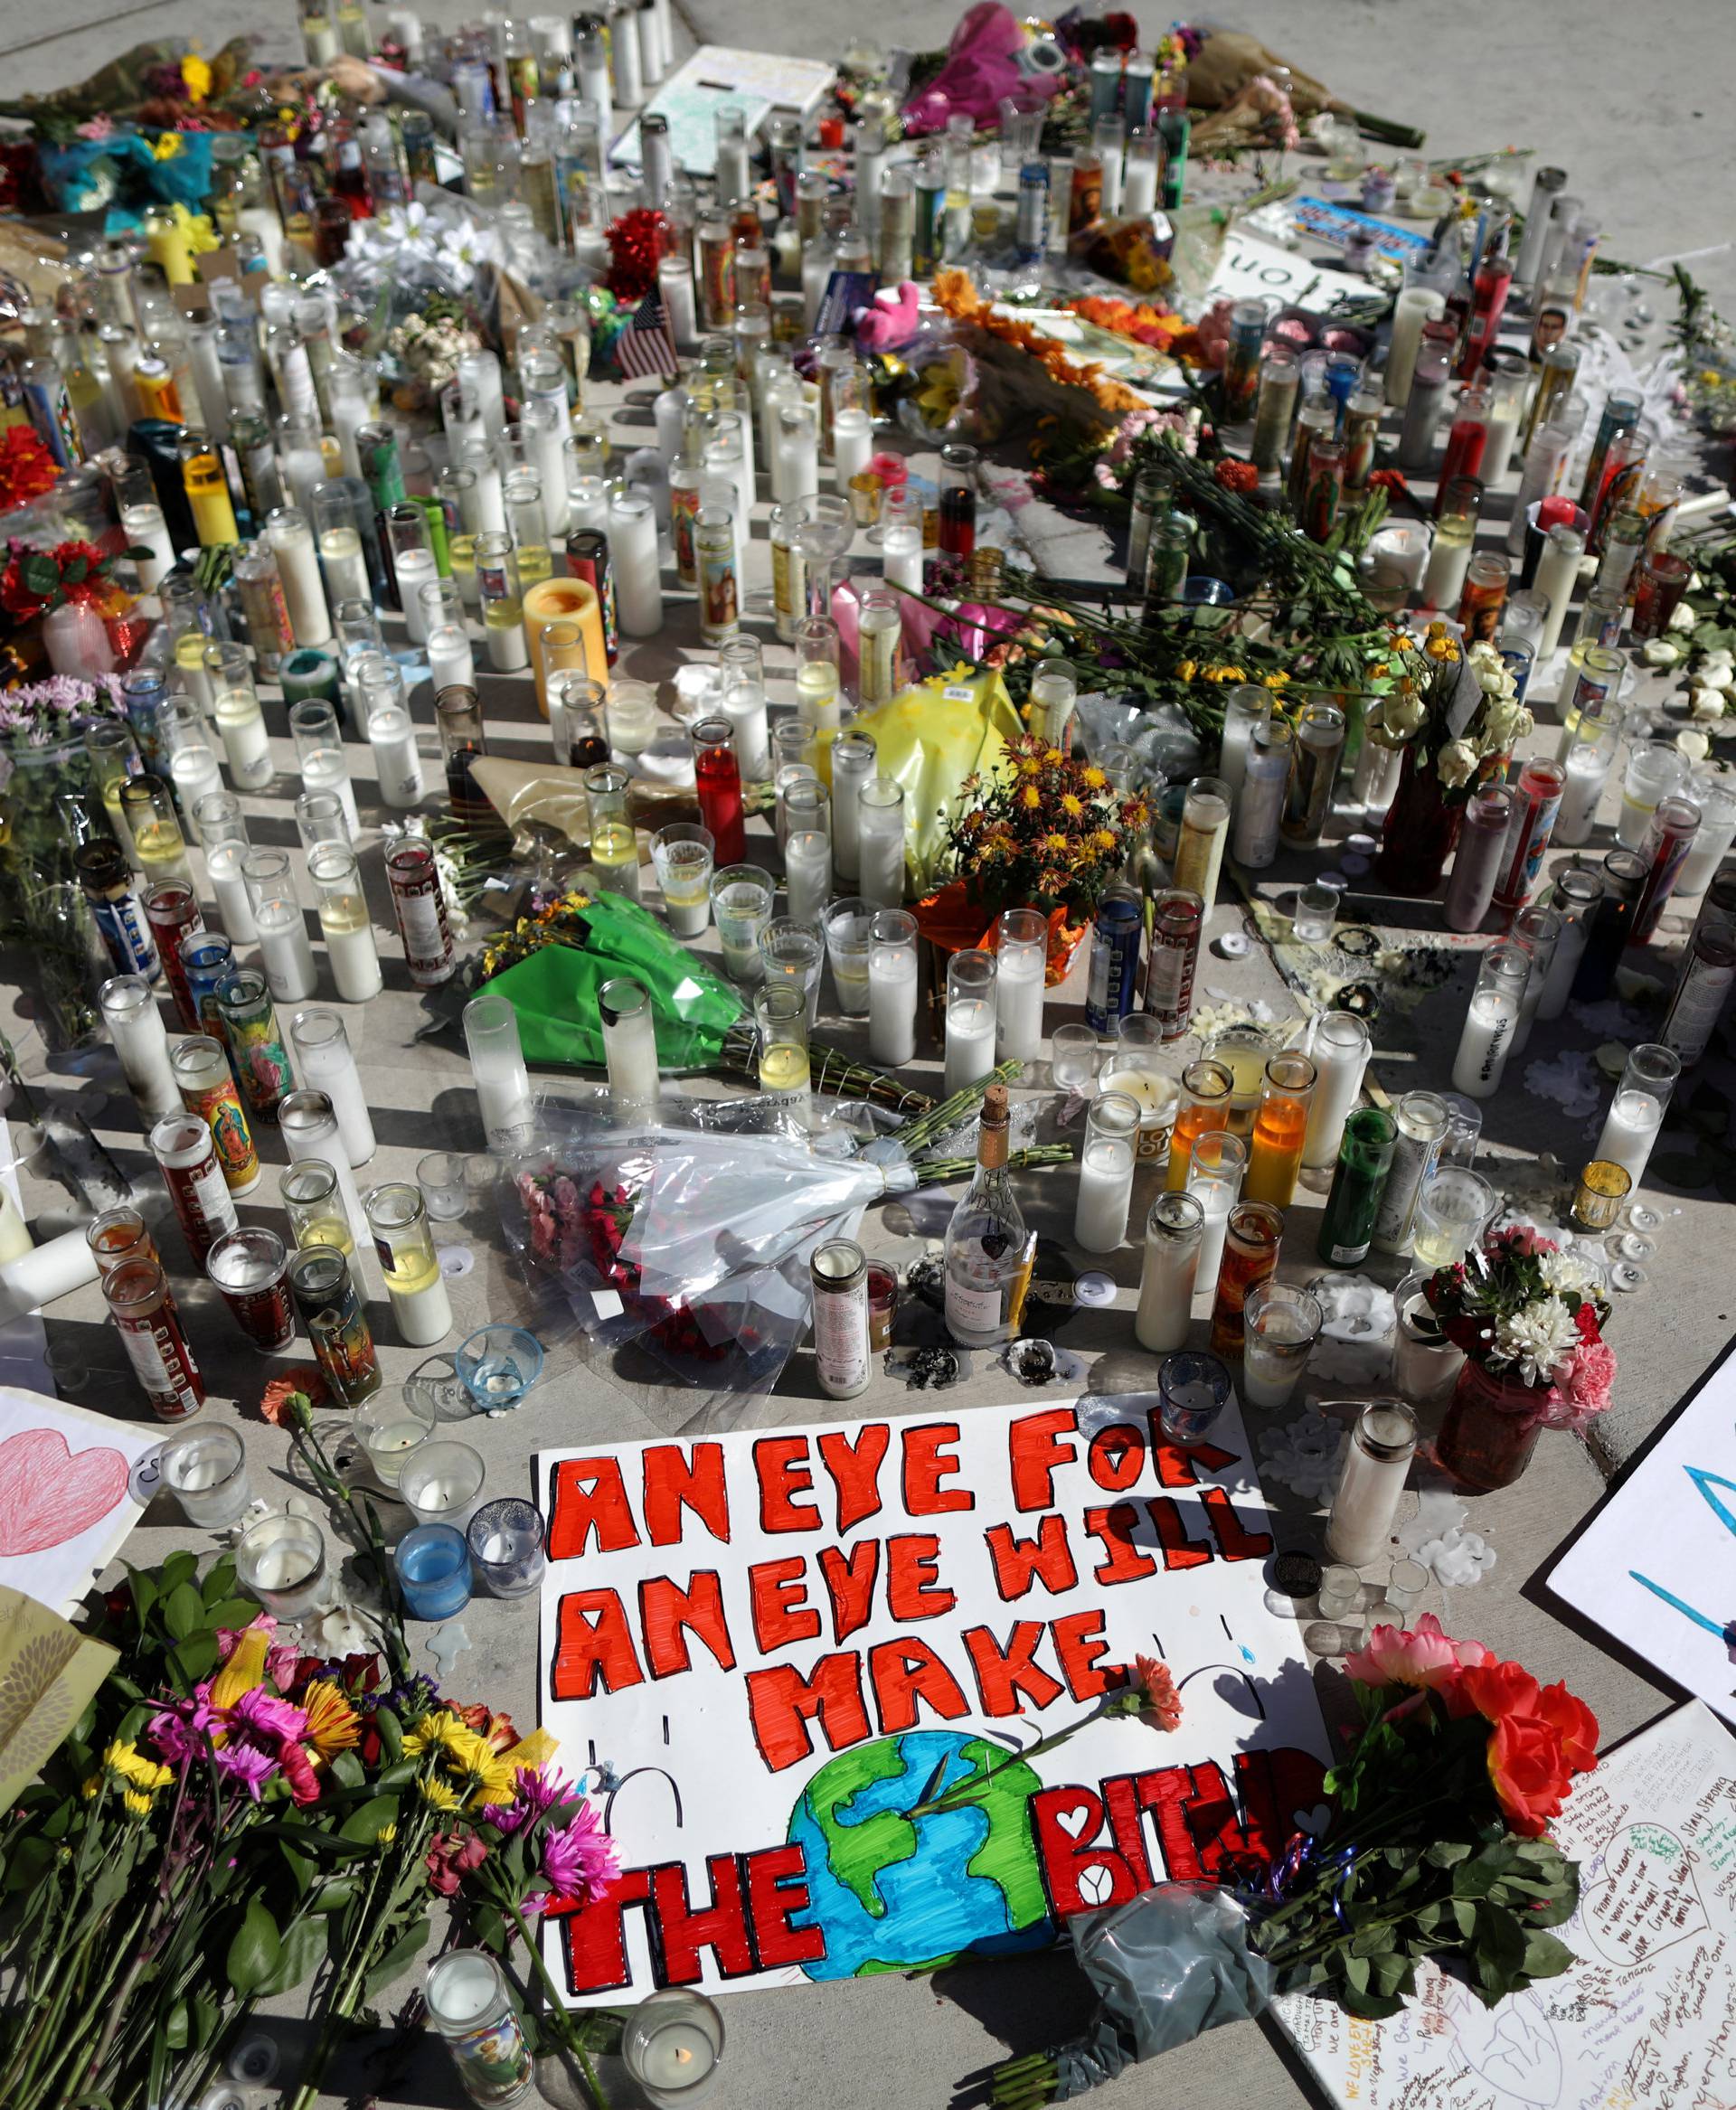 A makeshift memorial is seen on the Las Vegas Strip for victims of the Route 91 music festival mass shooting next to the Mandalay Bay Resort and Casino in Las Vegas